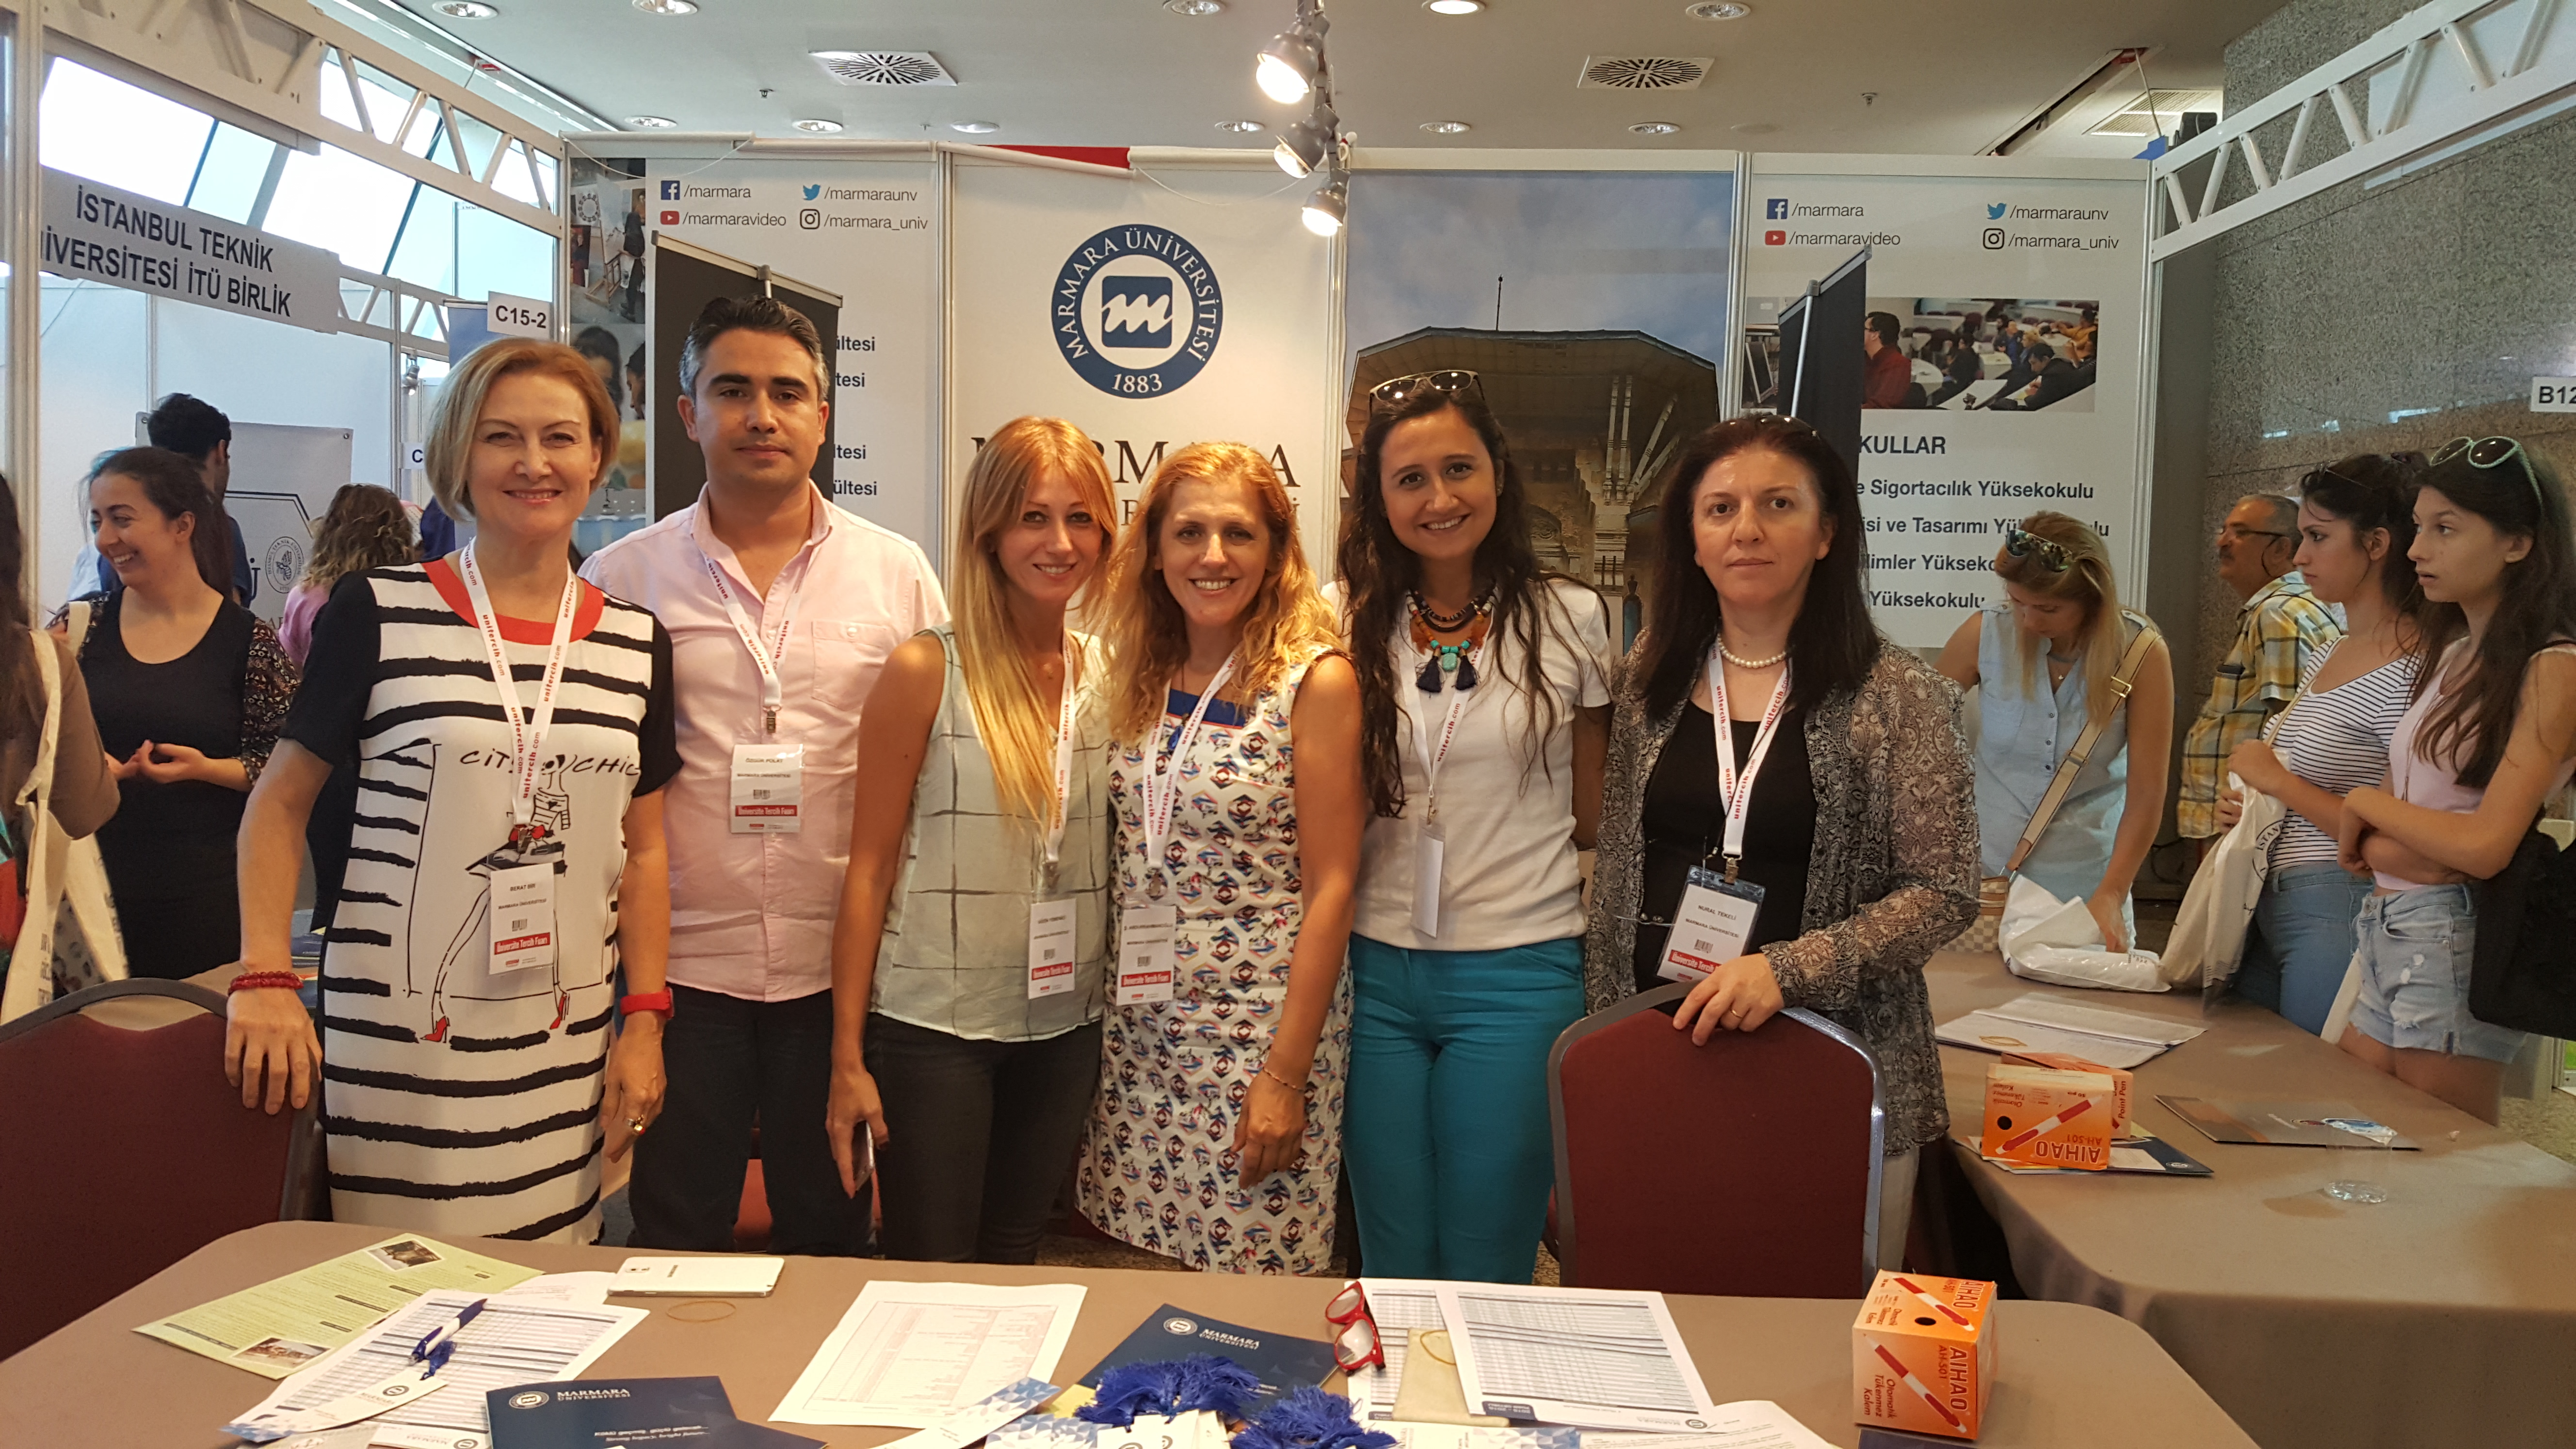    Marmara University’s Participation to the  “Istanbul Preference Exhibition ” For 3 days